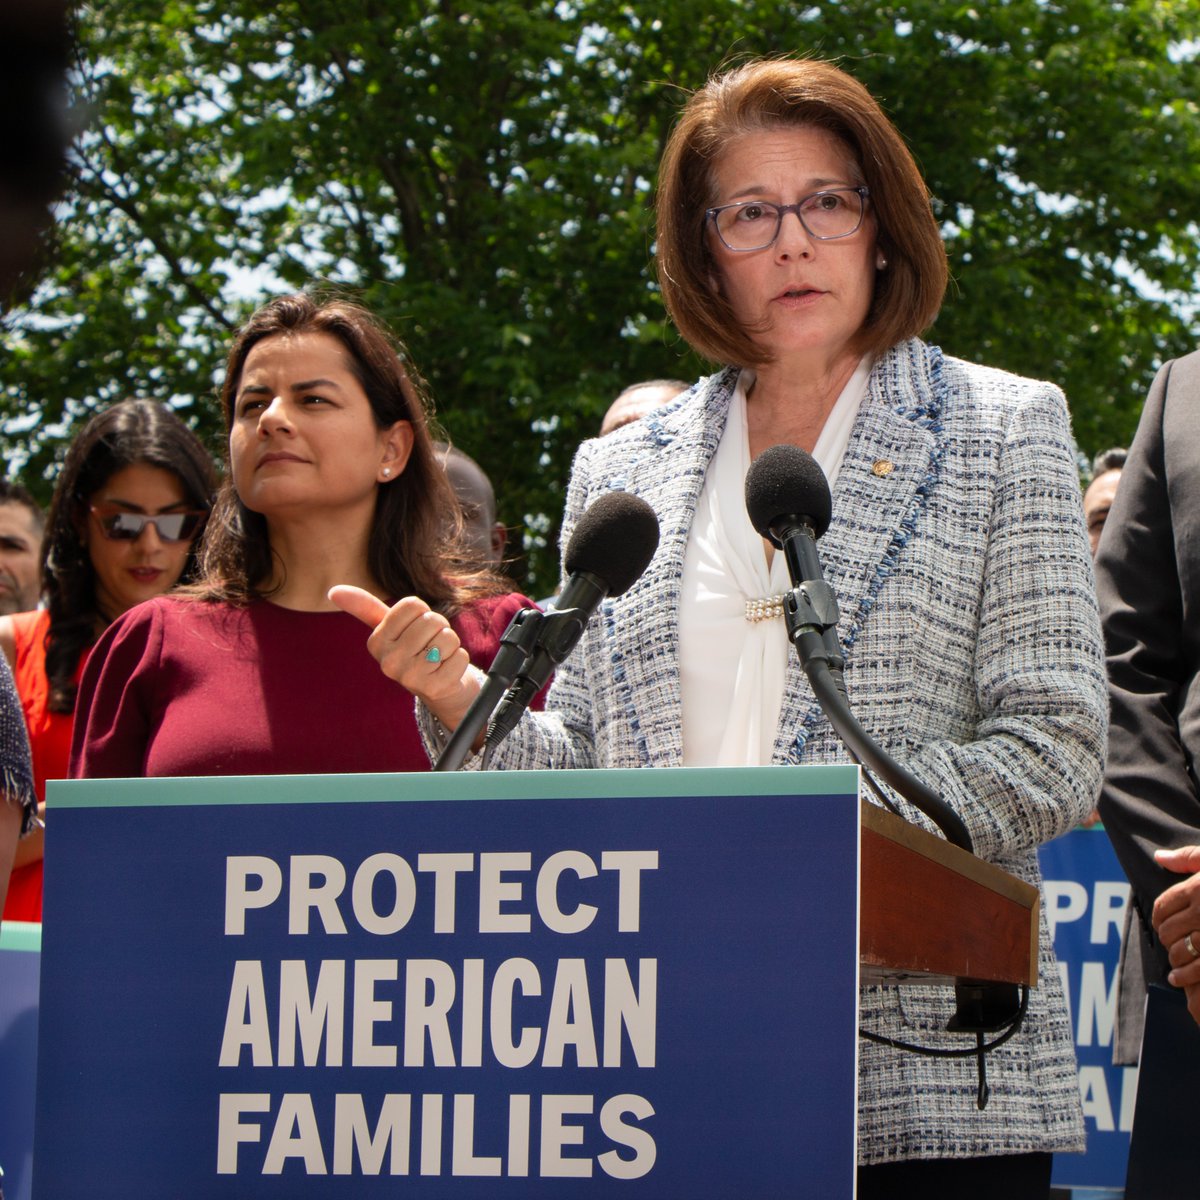 Our immigration system is broken, and we need to fix it. That starts by treating families, caregivers, and hardworking immigrants in our communities with dignity. Today, I proudly stood with my colleagues to call on Pres. Biden to take executive action to keep families together.